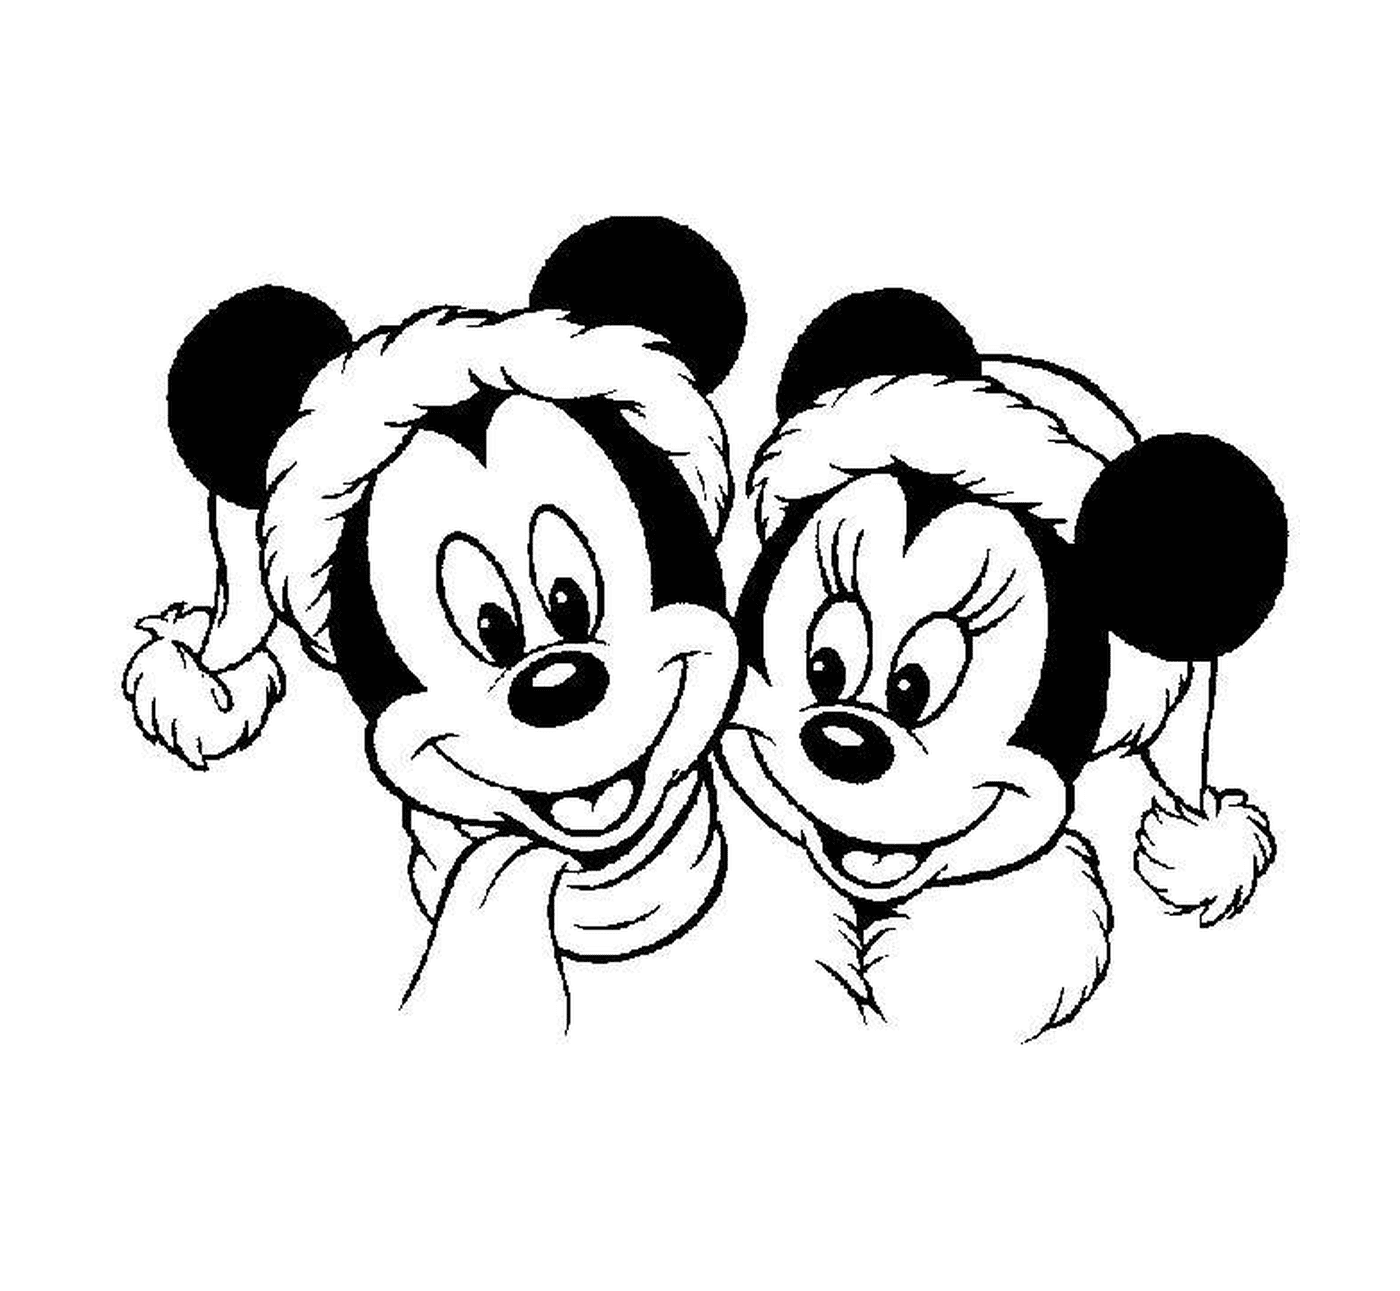  Mickey and Minnie smiling 